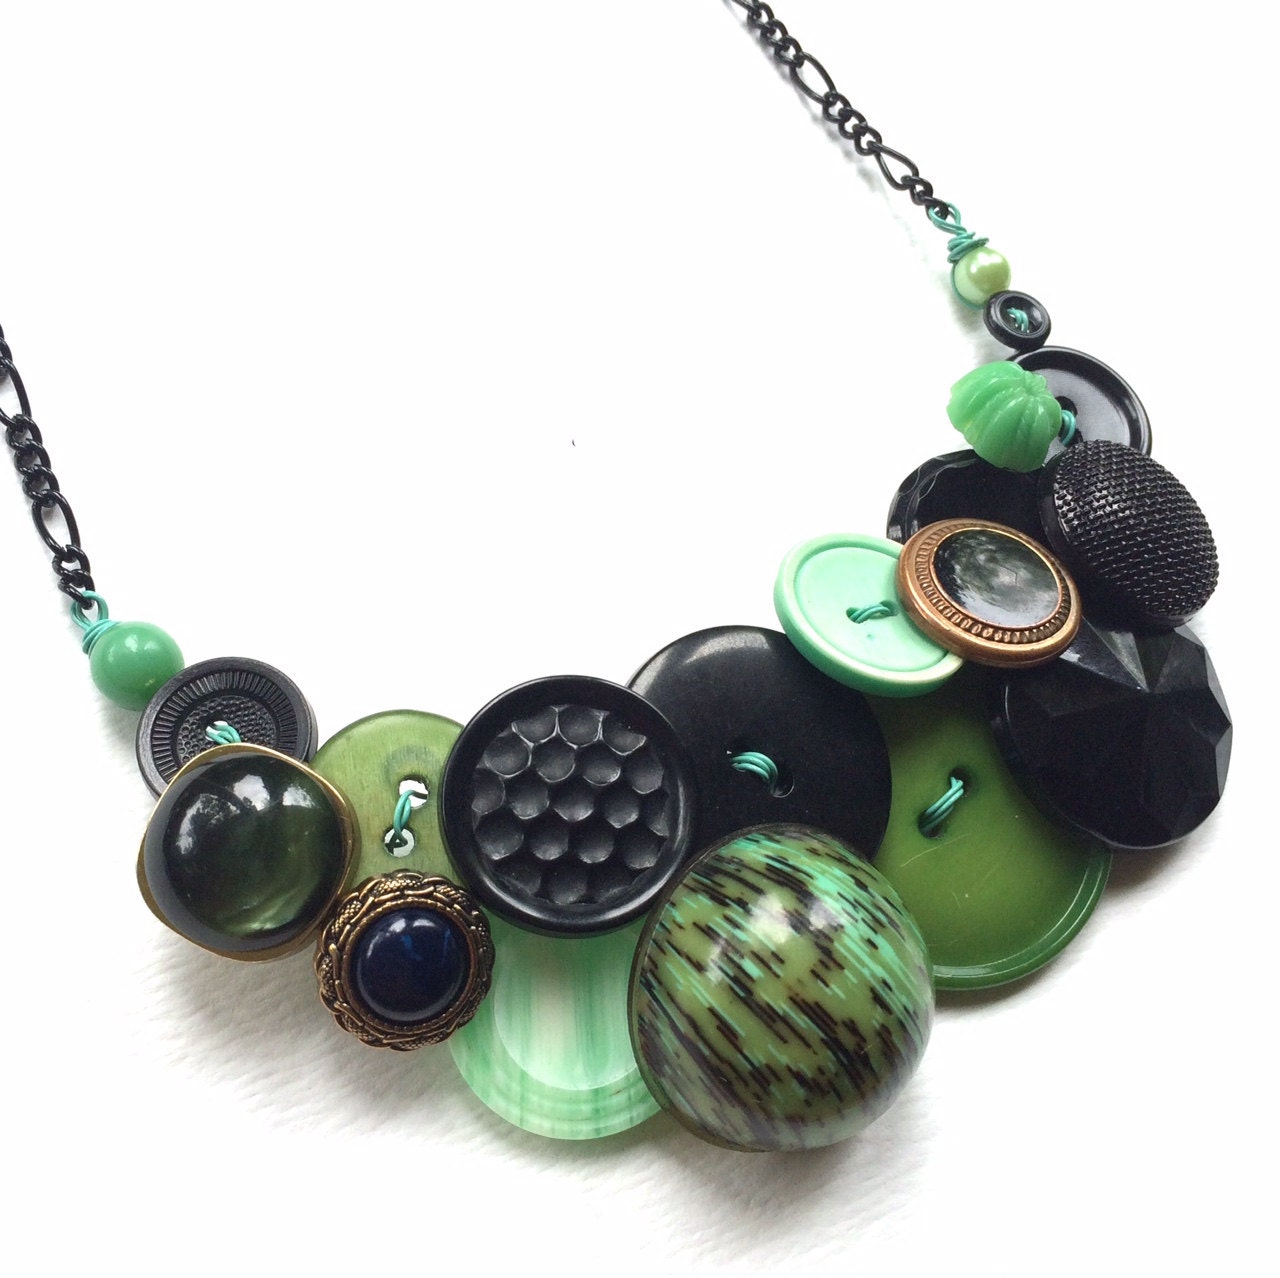 Big Funky Vintage Button Necklace in Shades of Green and Black